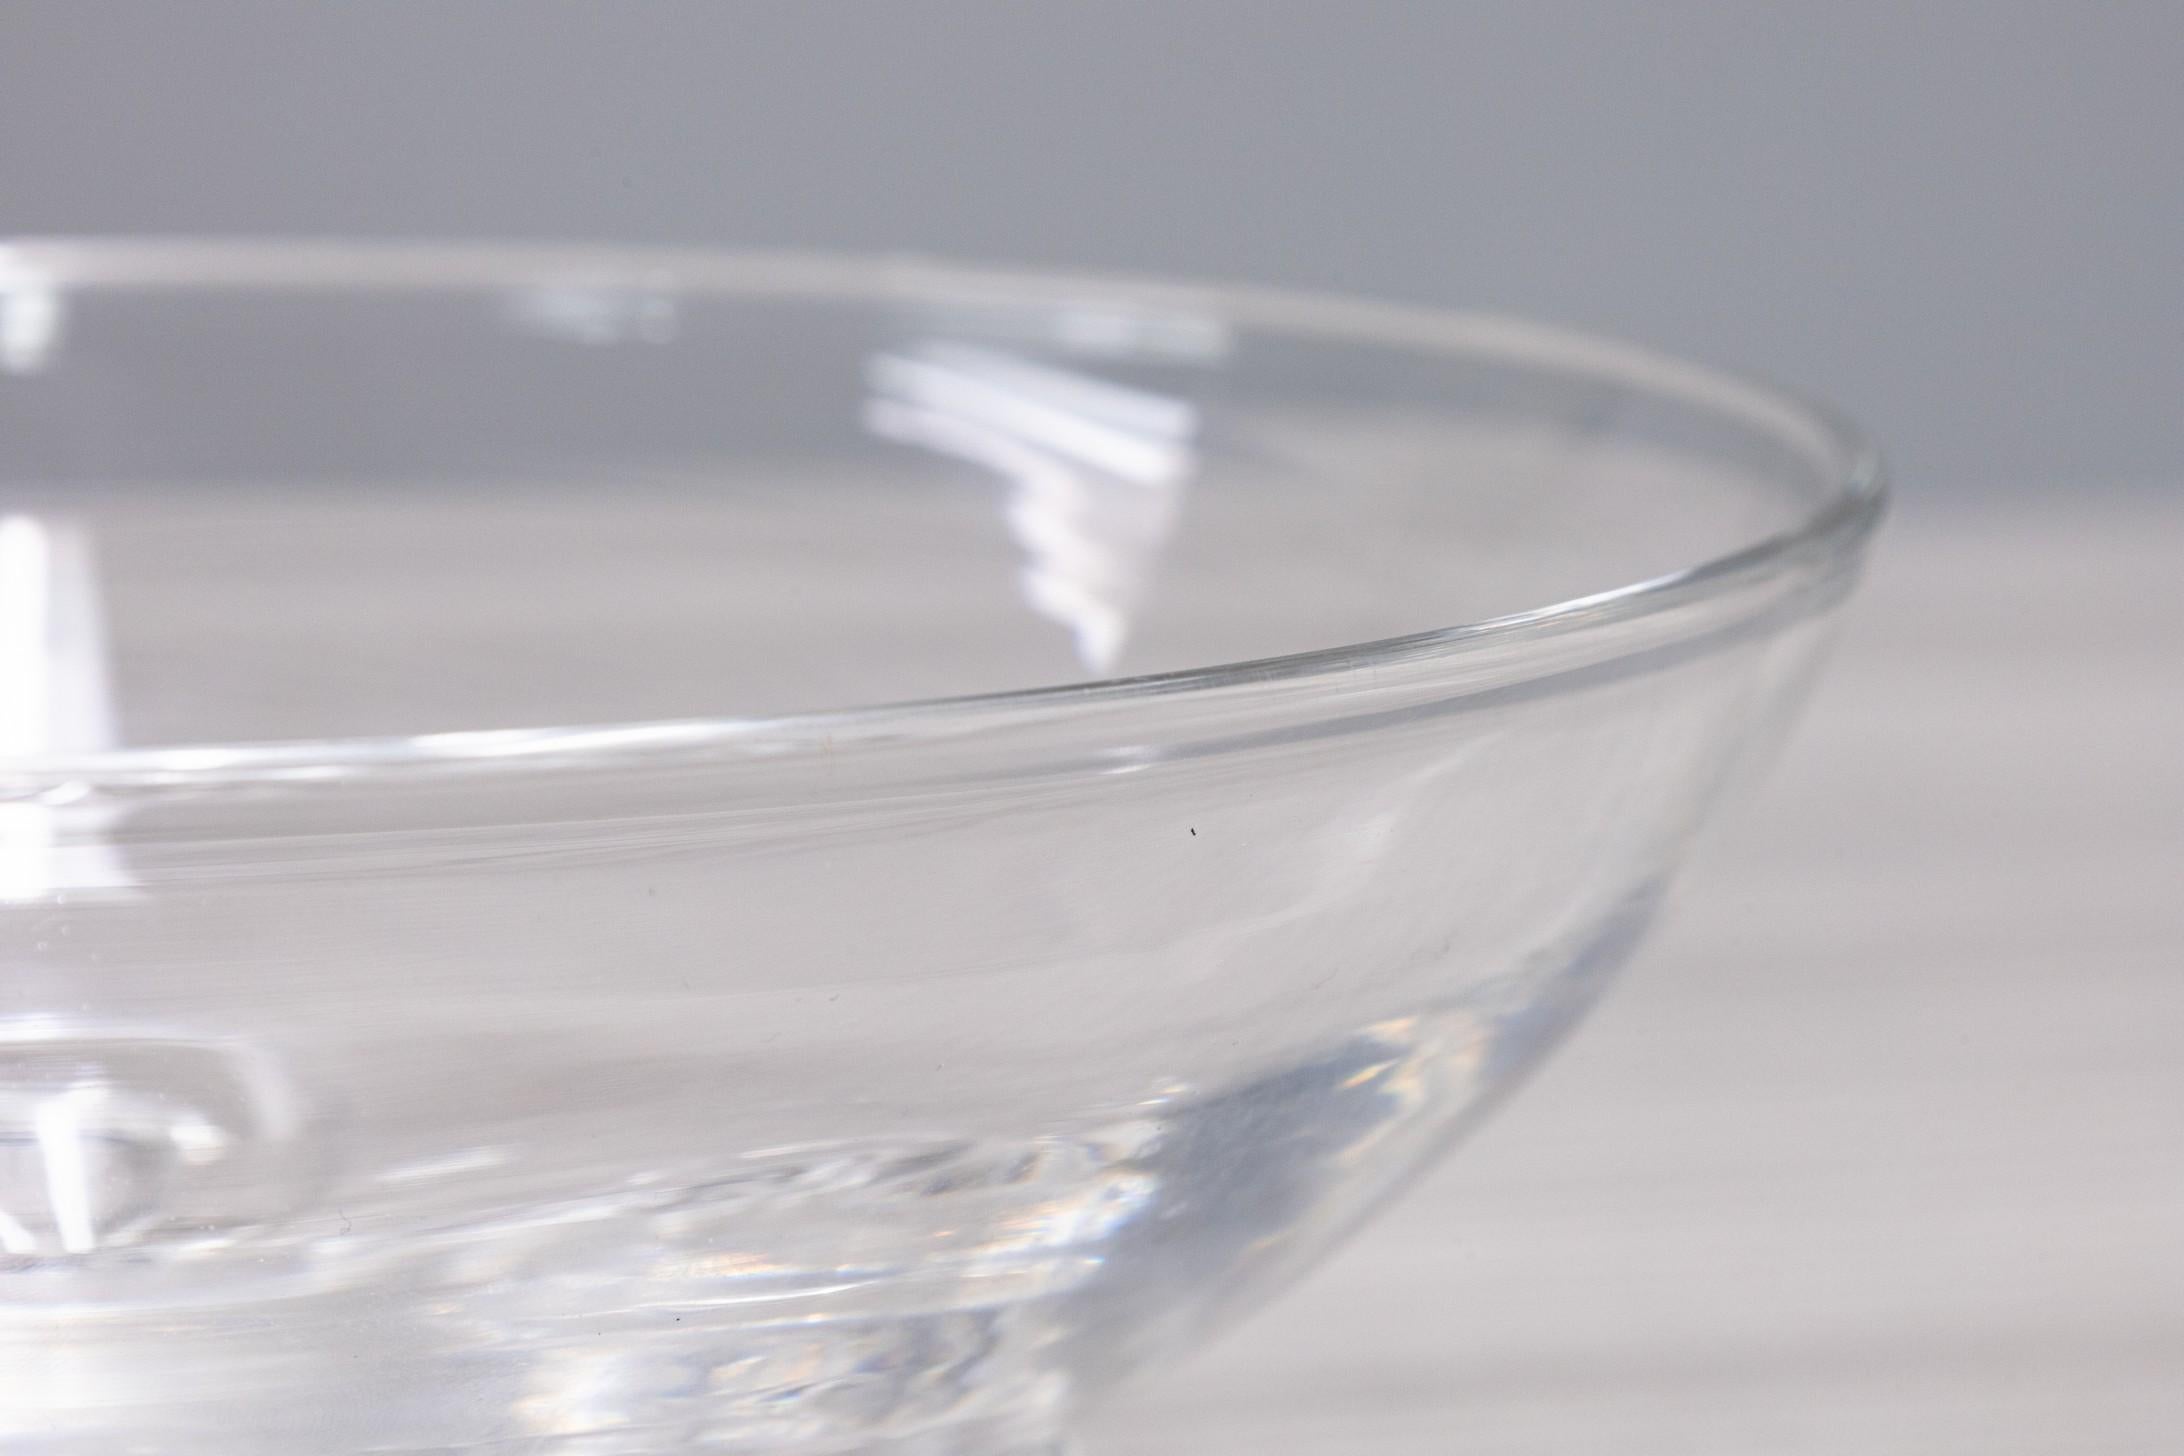 An amazing classic Steuben glass bowl from artist Donald Pollard. This small crystal bowl features an elegant thin rim, leading down to three looped feet surrounding the base. This piece is signed and the underside. It measures 3.5 in tall, and has